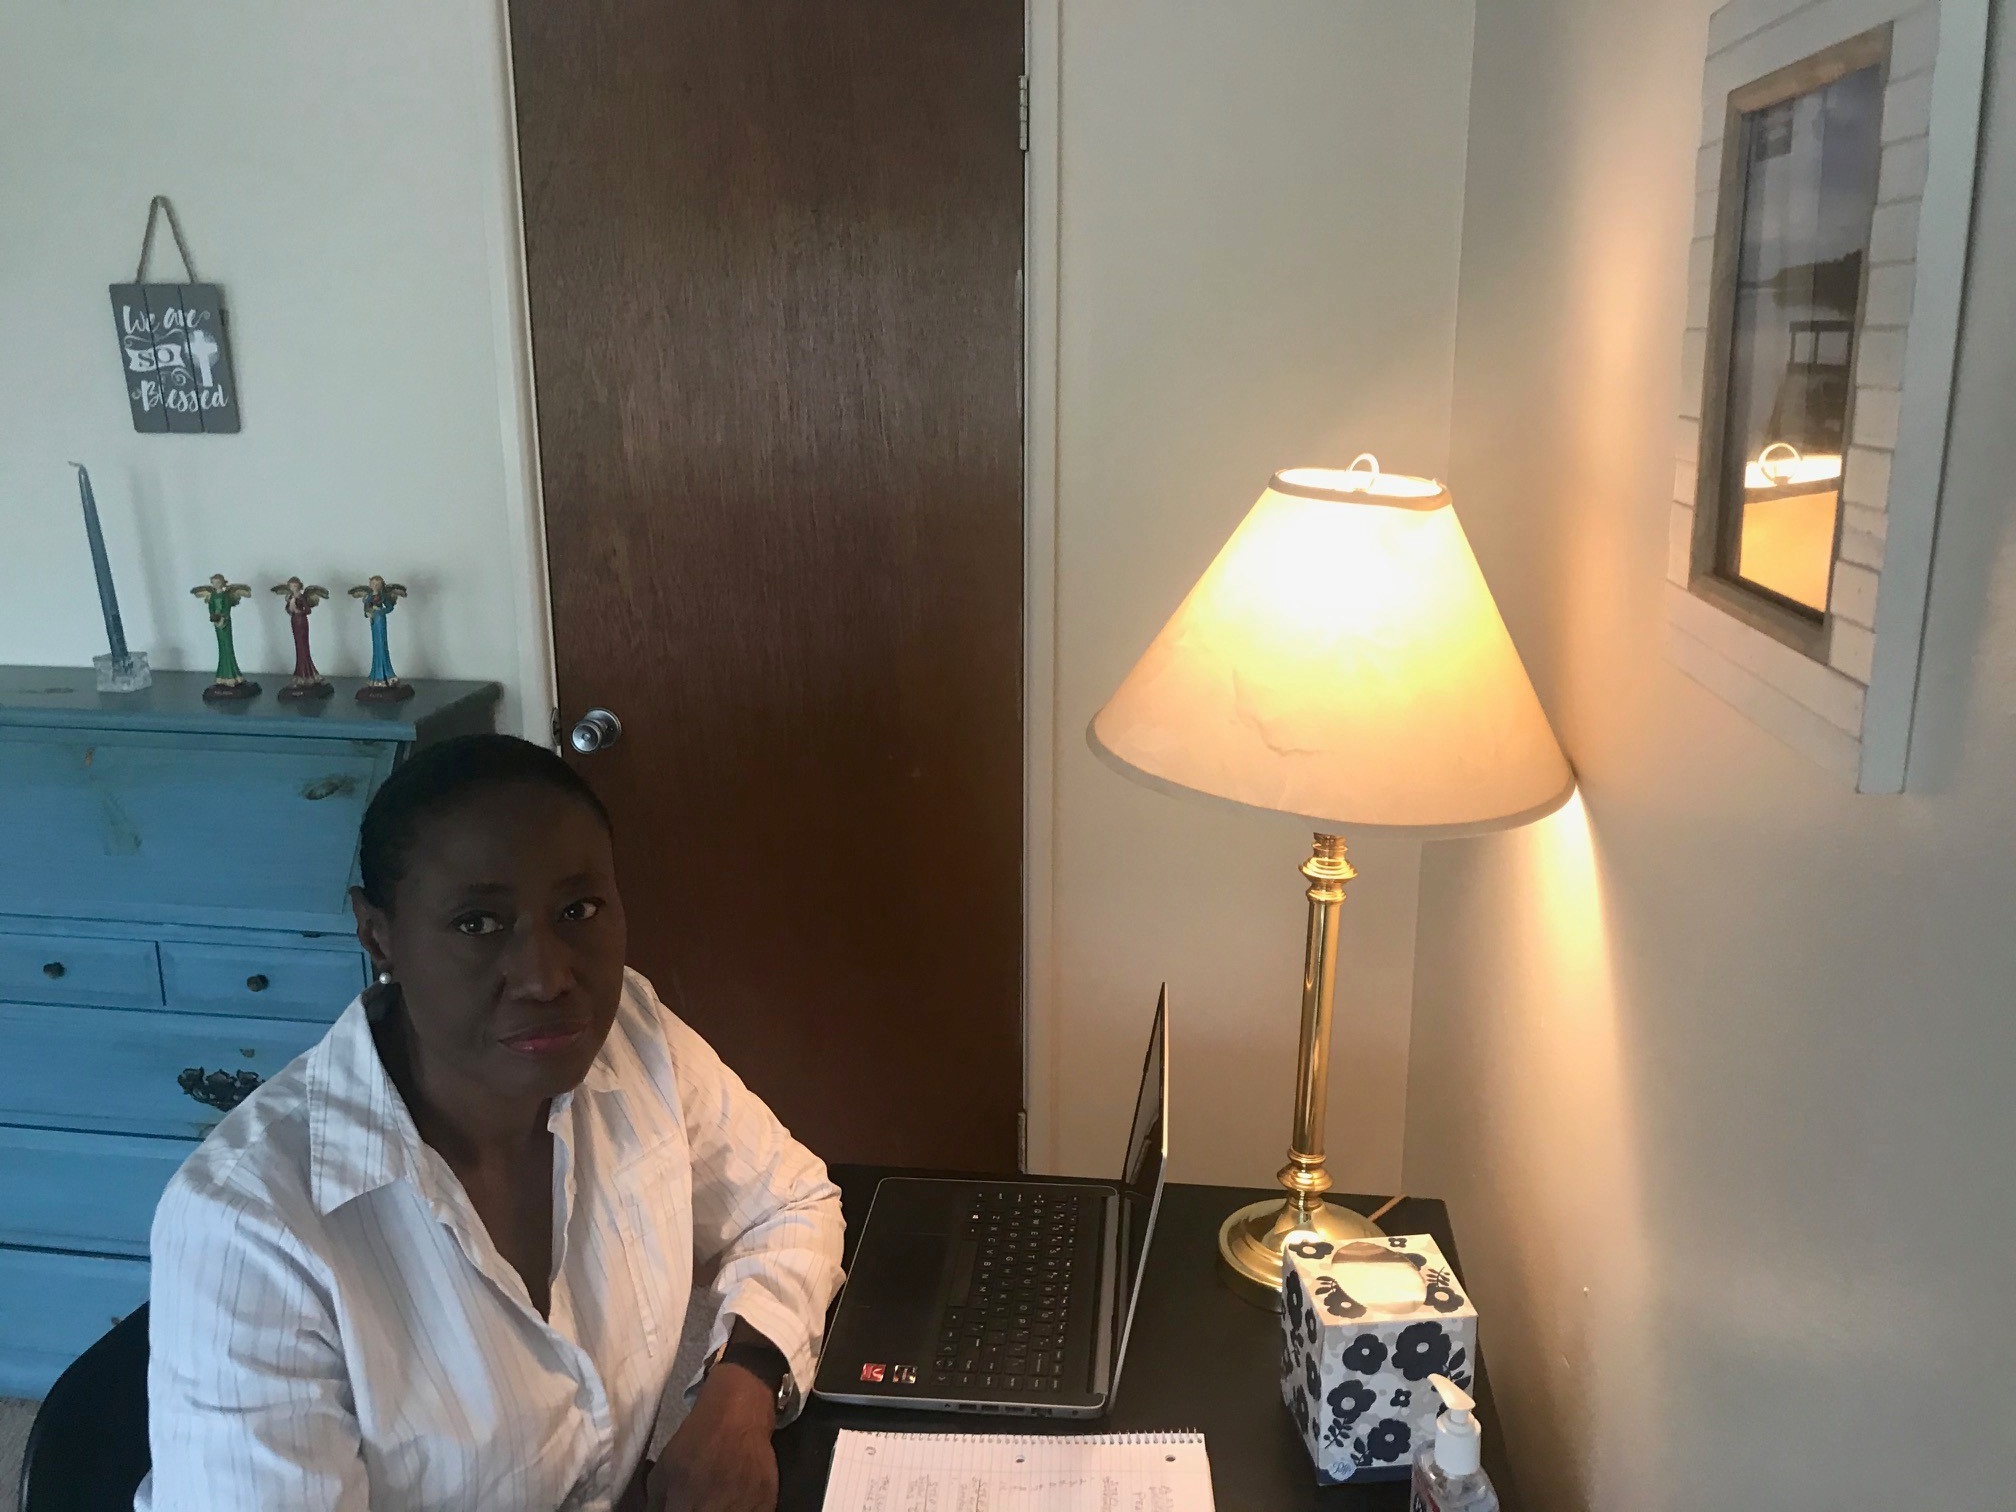 Training at Home for the Job You Want, Meet SCSEP Participant Denise